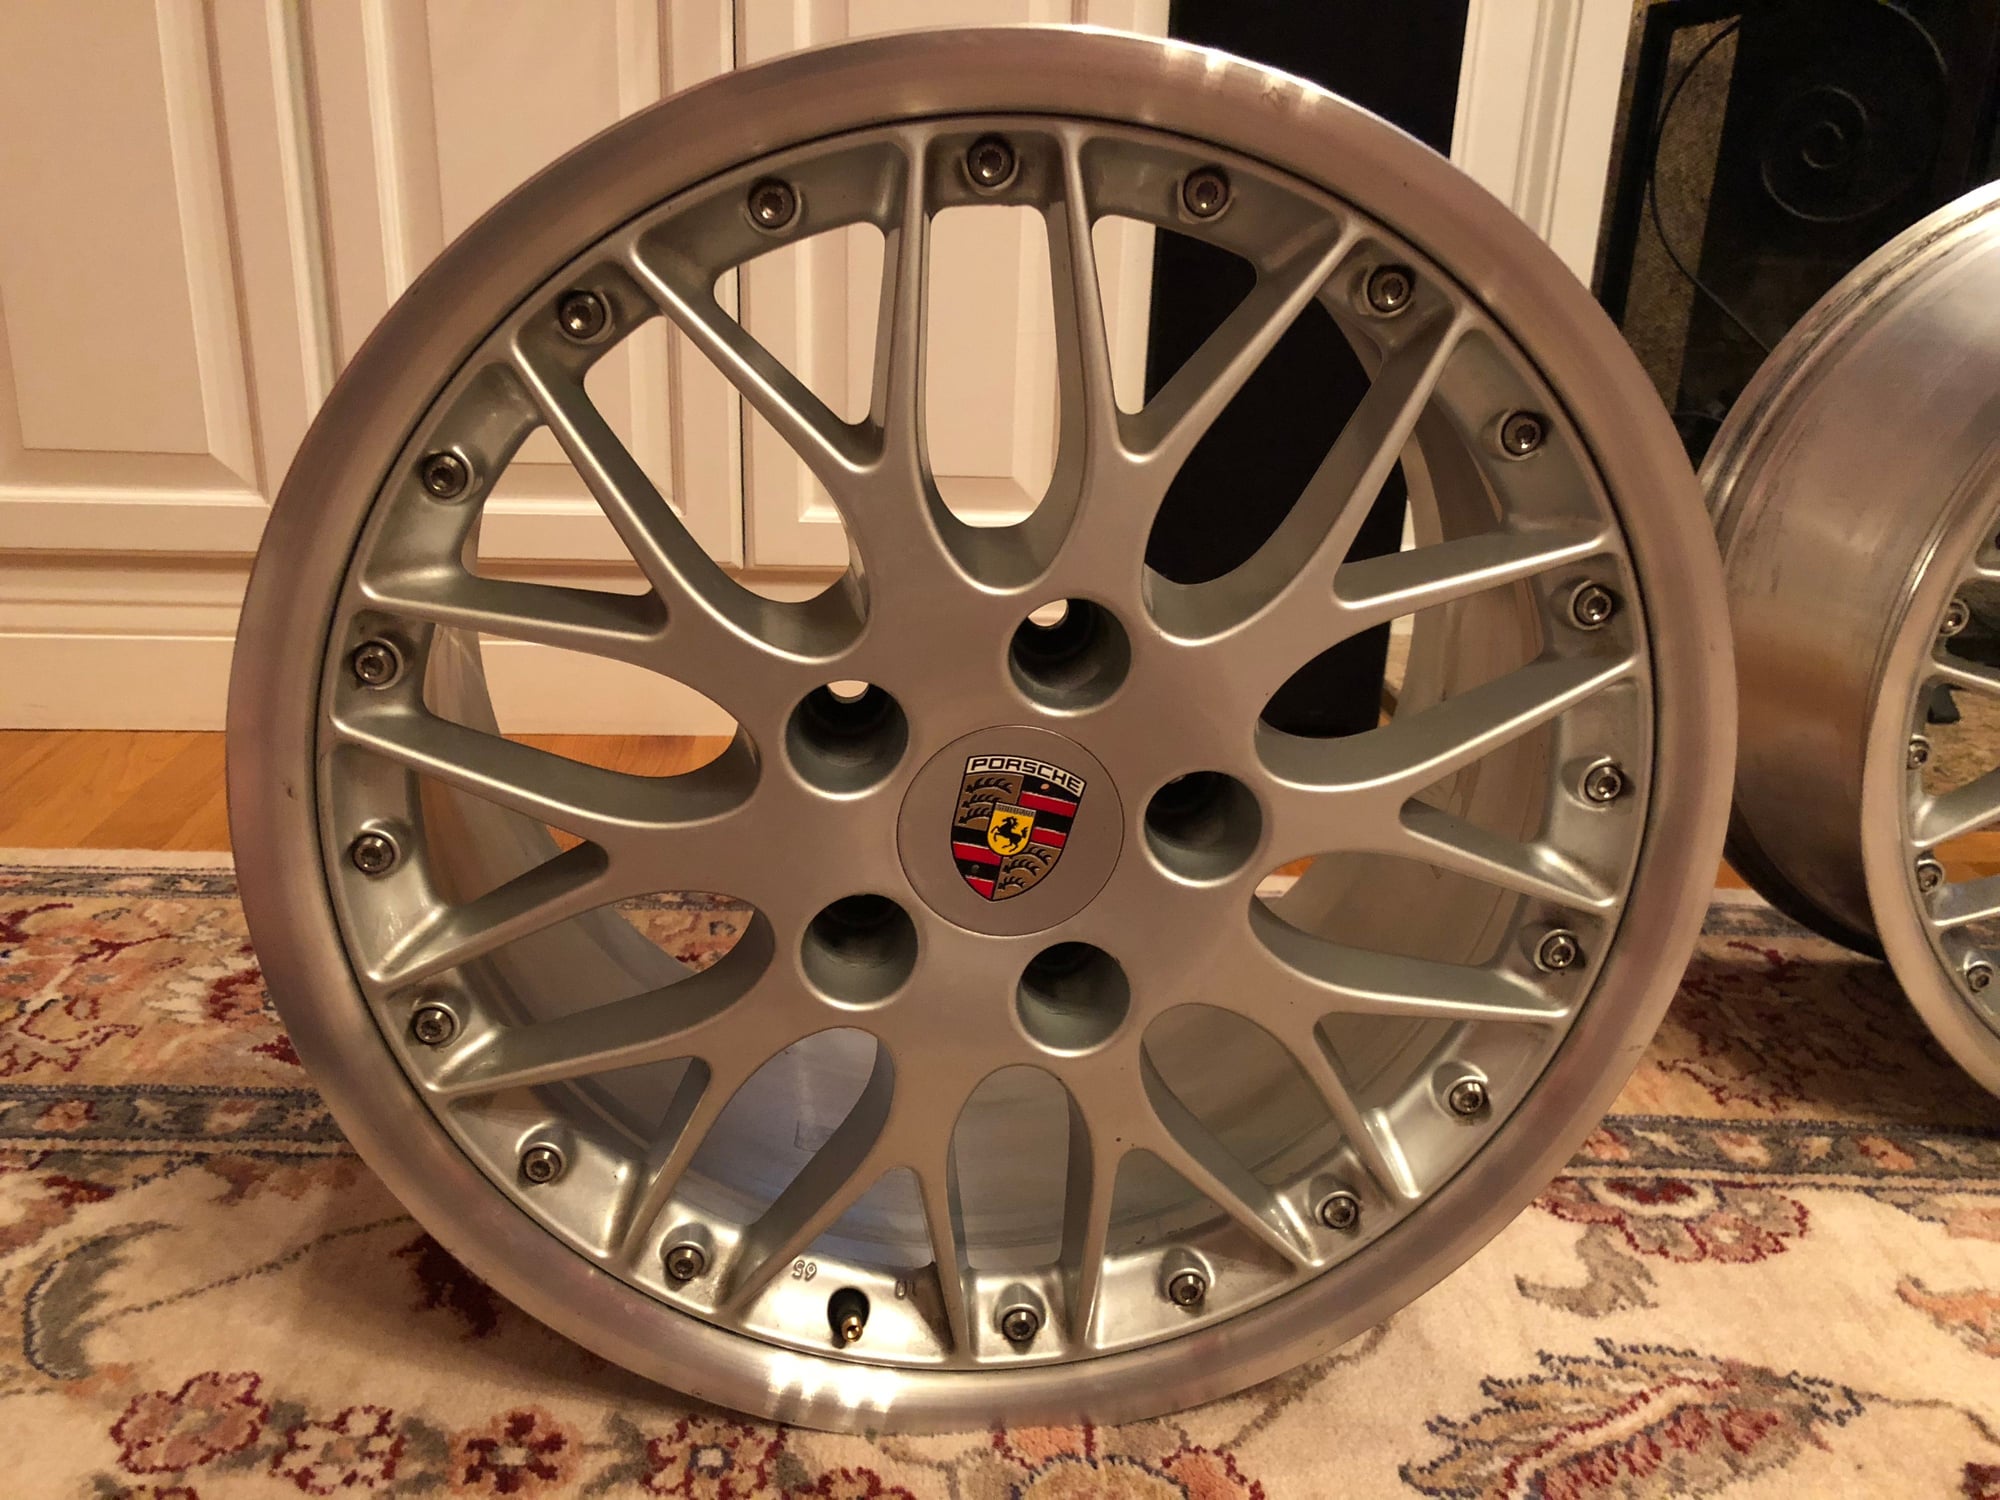 Wheels and Tires/Axles - OEM 18" BBS Sport Classic II Wheels - Used - 1990 to 2004 Porsche 718 Spyder - Boston, MA 02090, United States